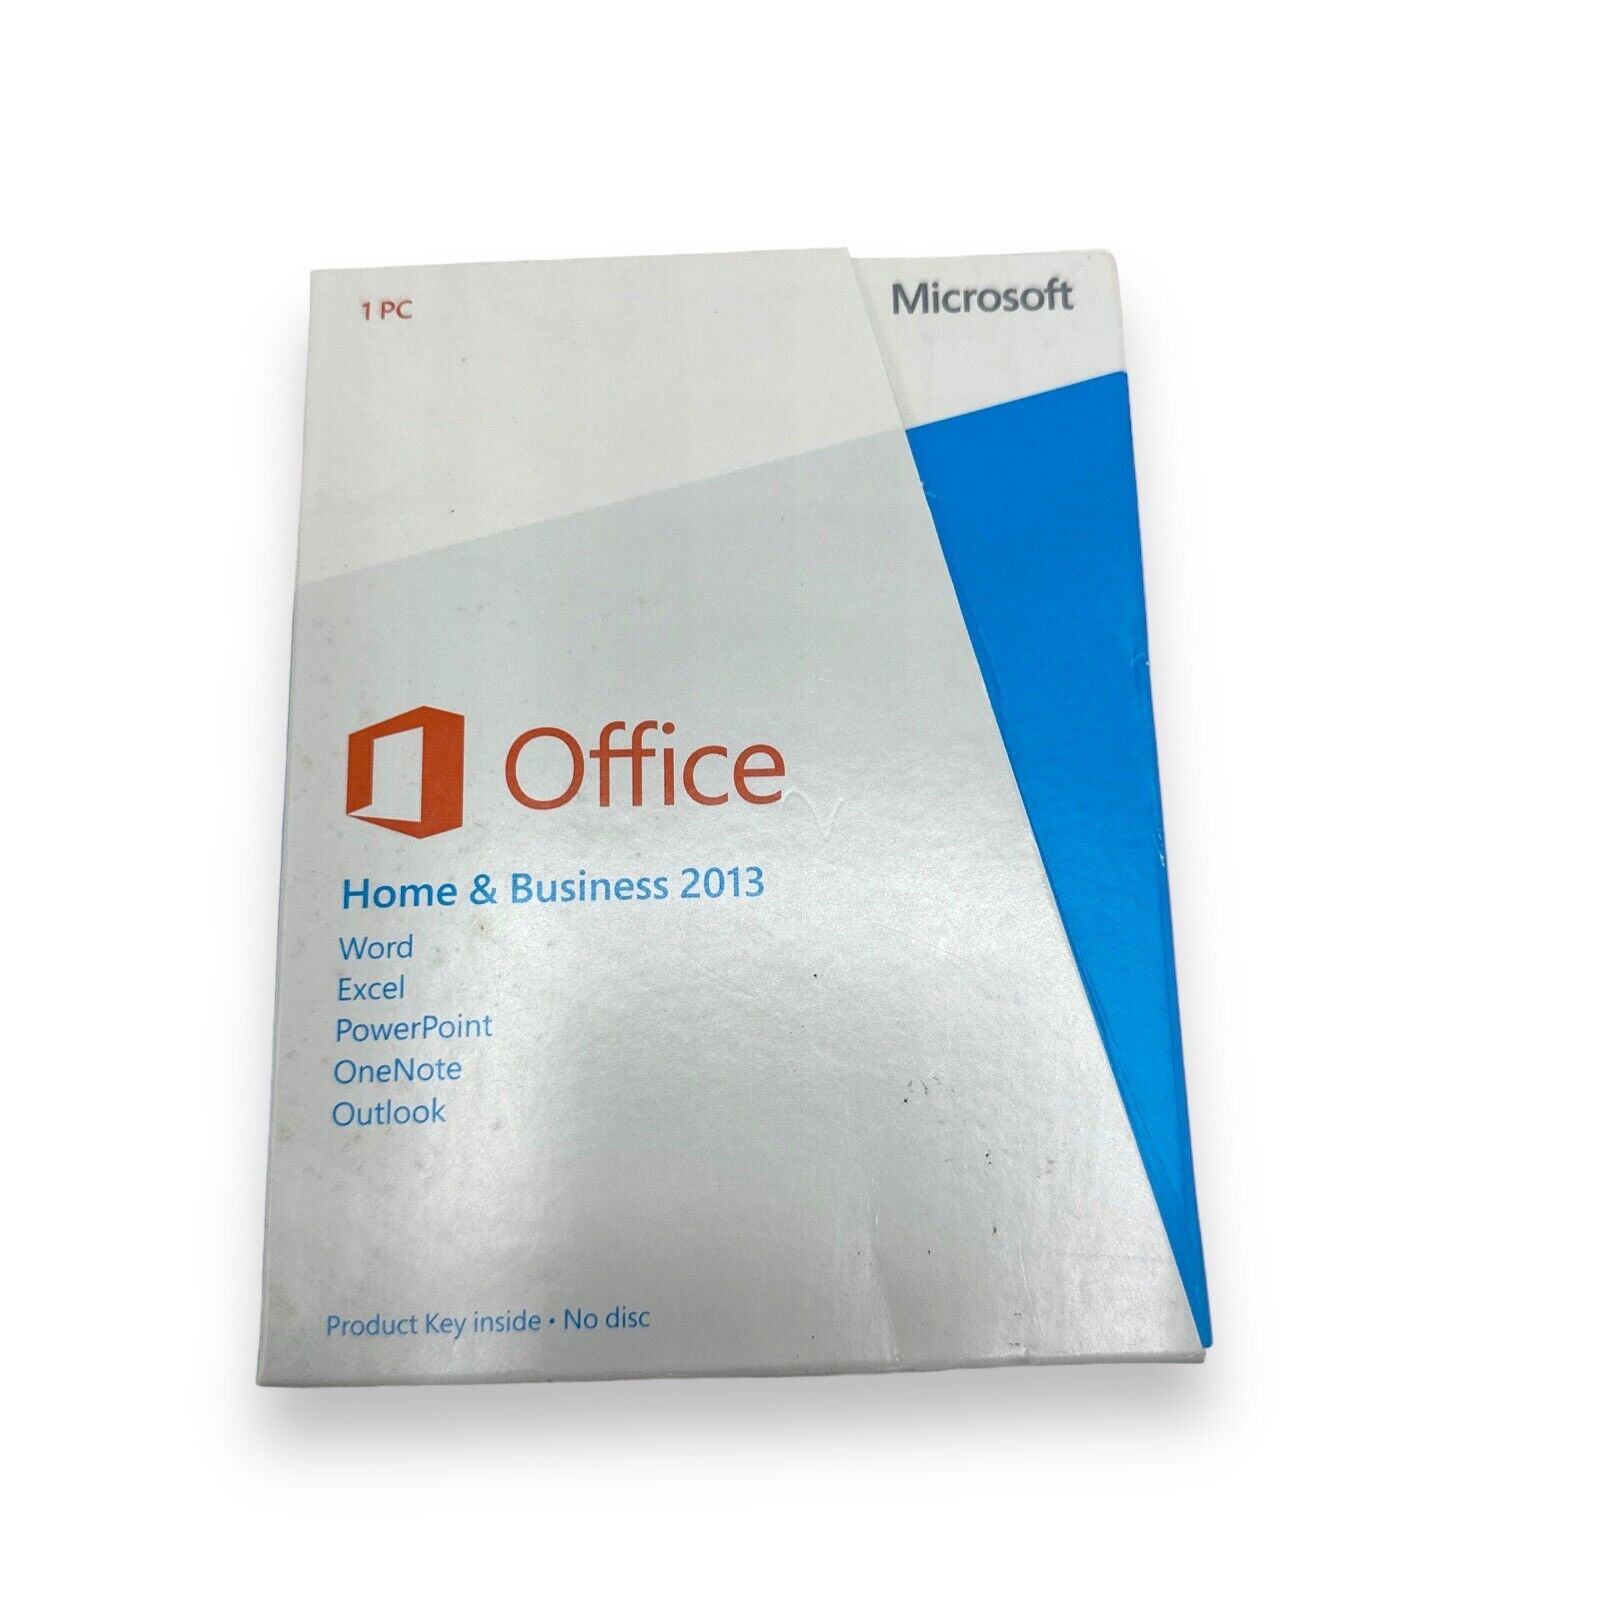 Microsoft Office 2013 Home & Business Product Key - MediaLess 